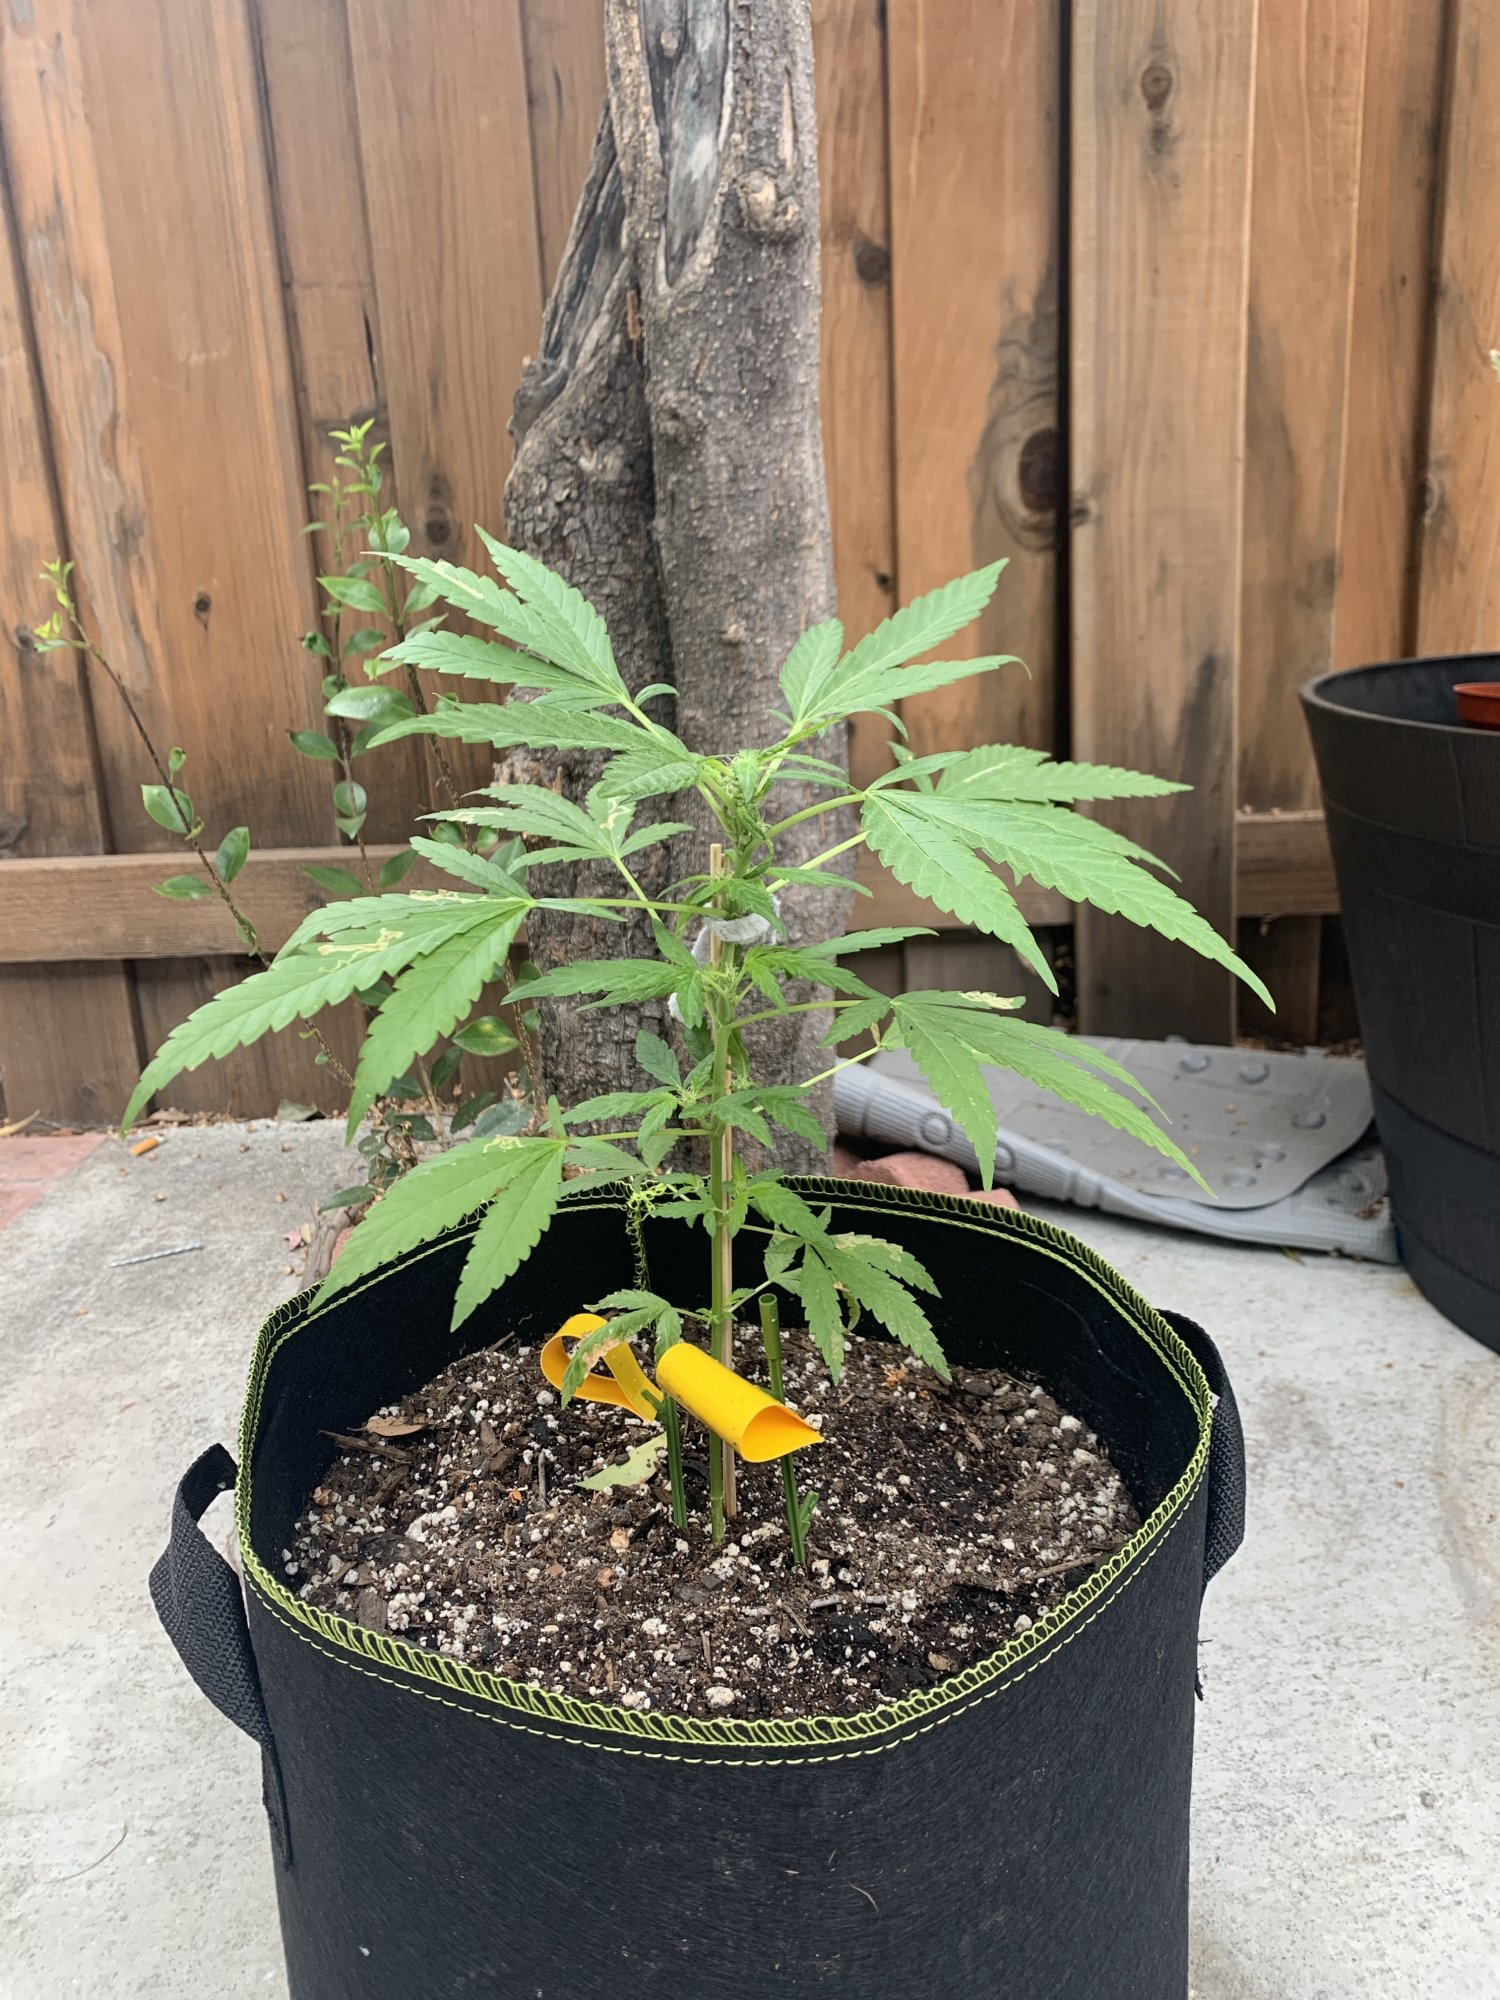 New grower need help with first plant